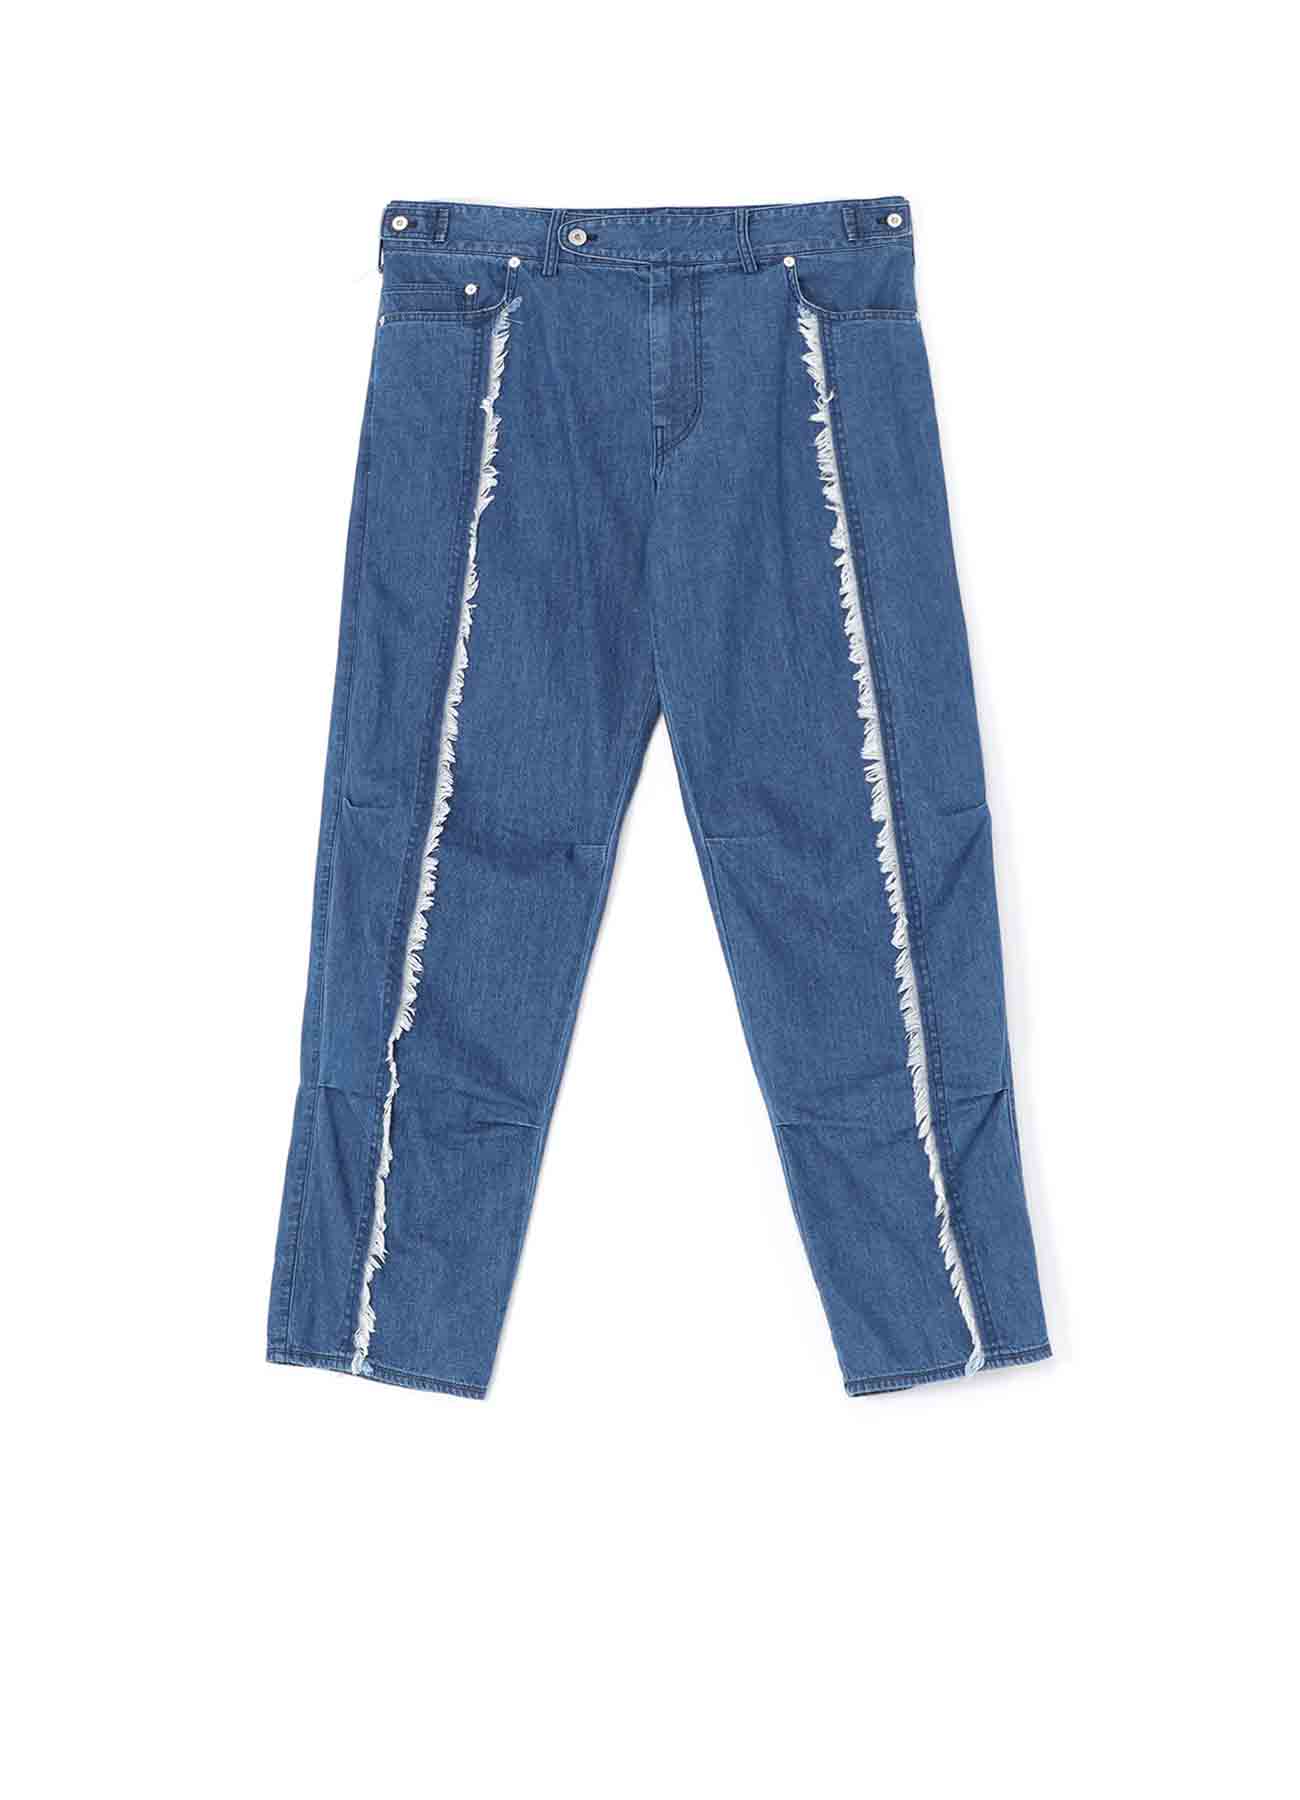 8OZ DENIM PANTS WITH RIPPED LINE DETAIL